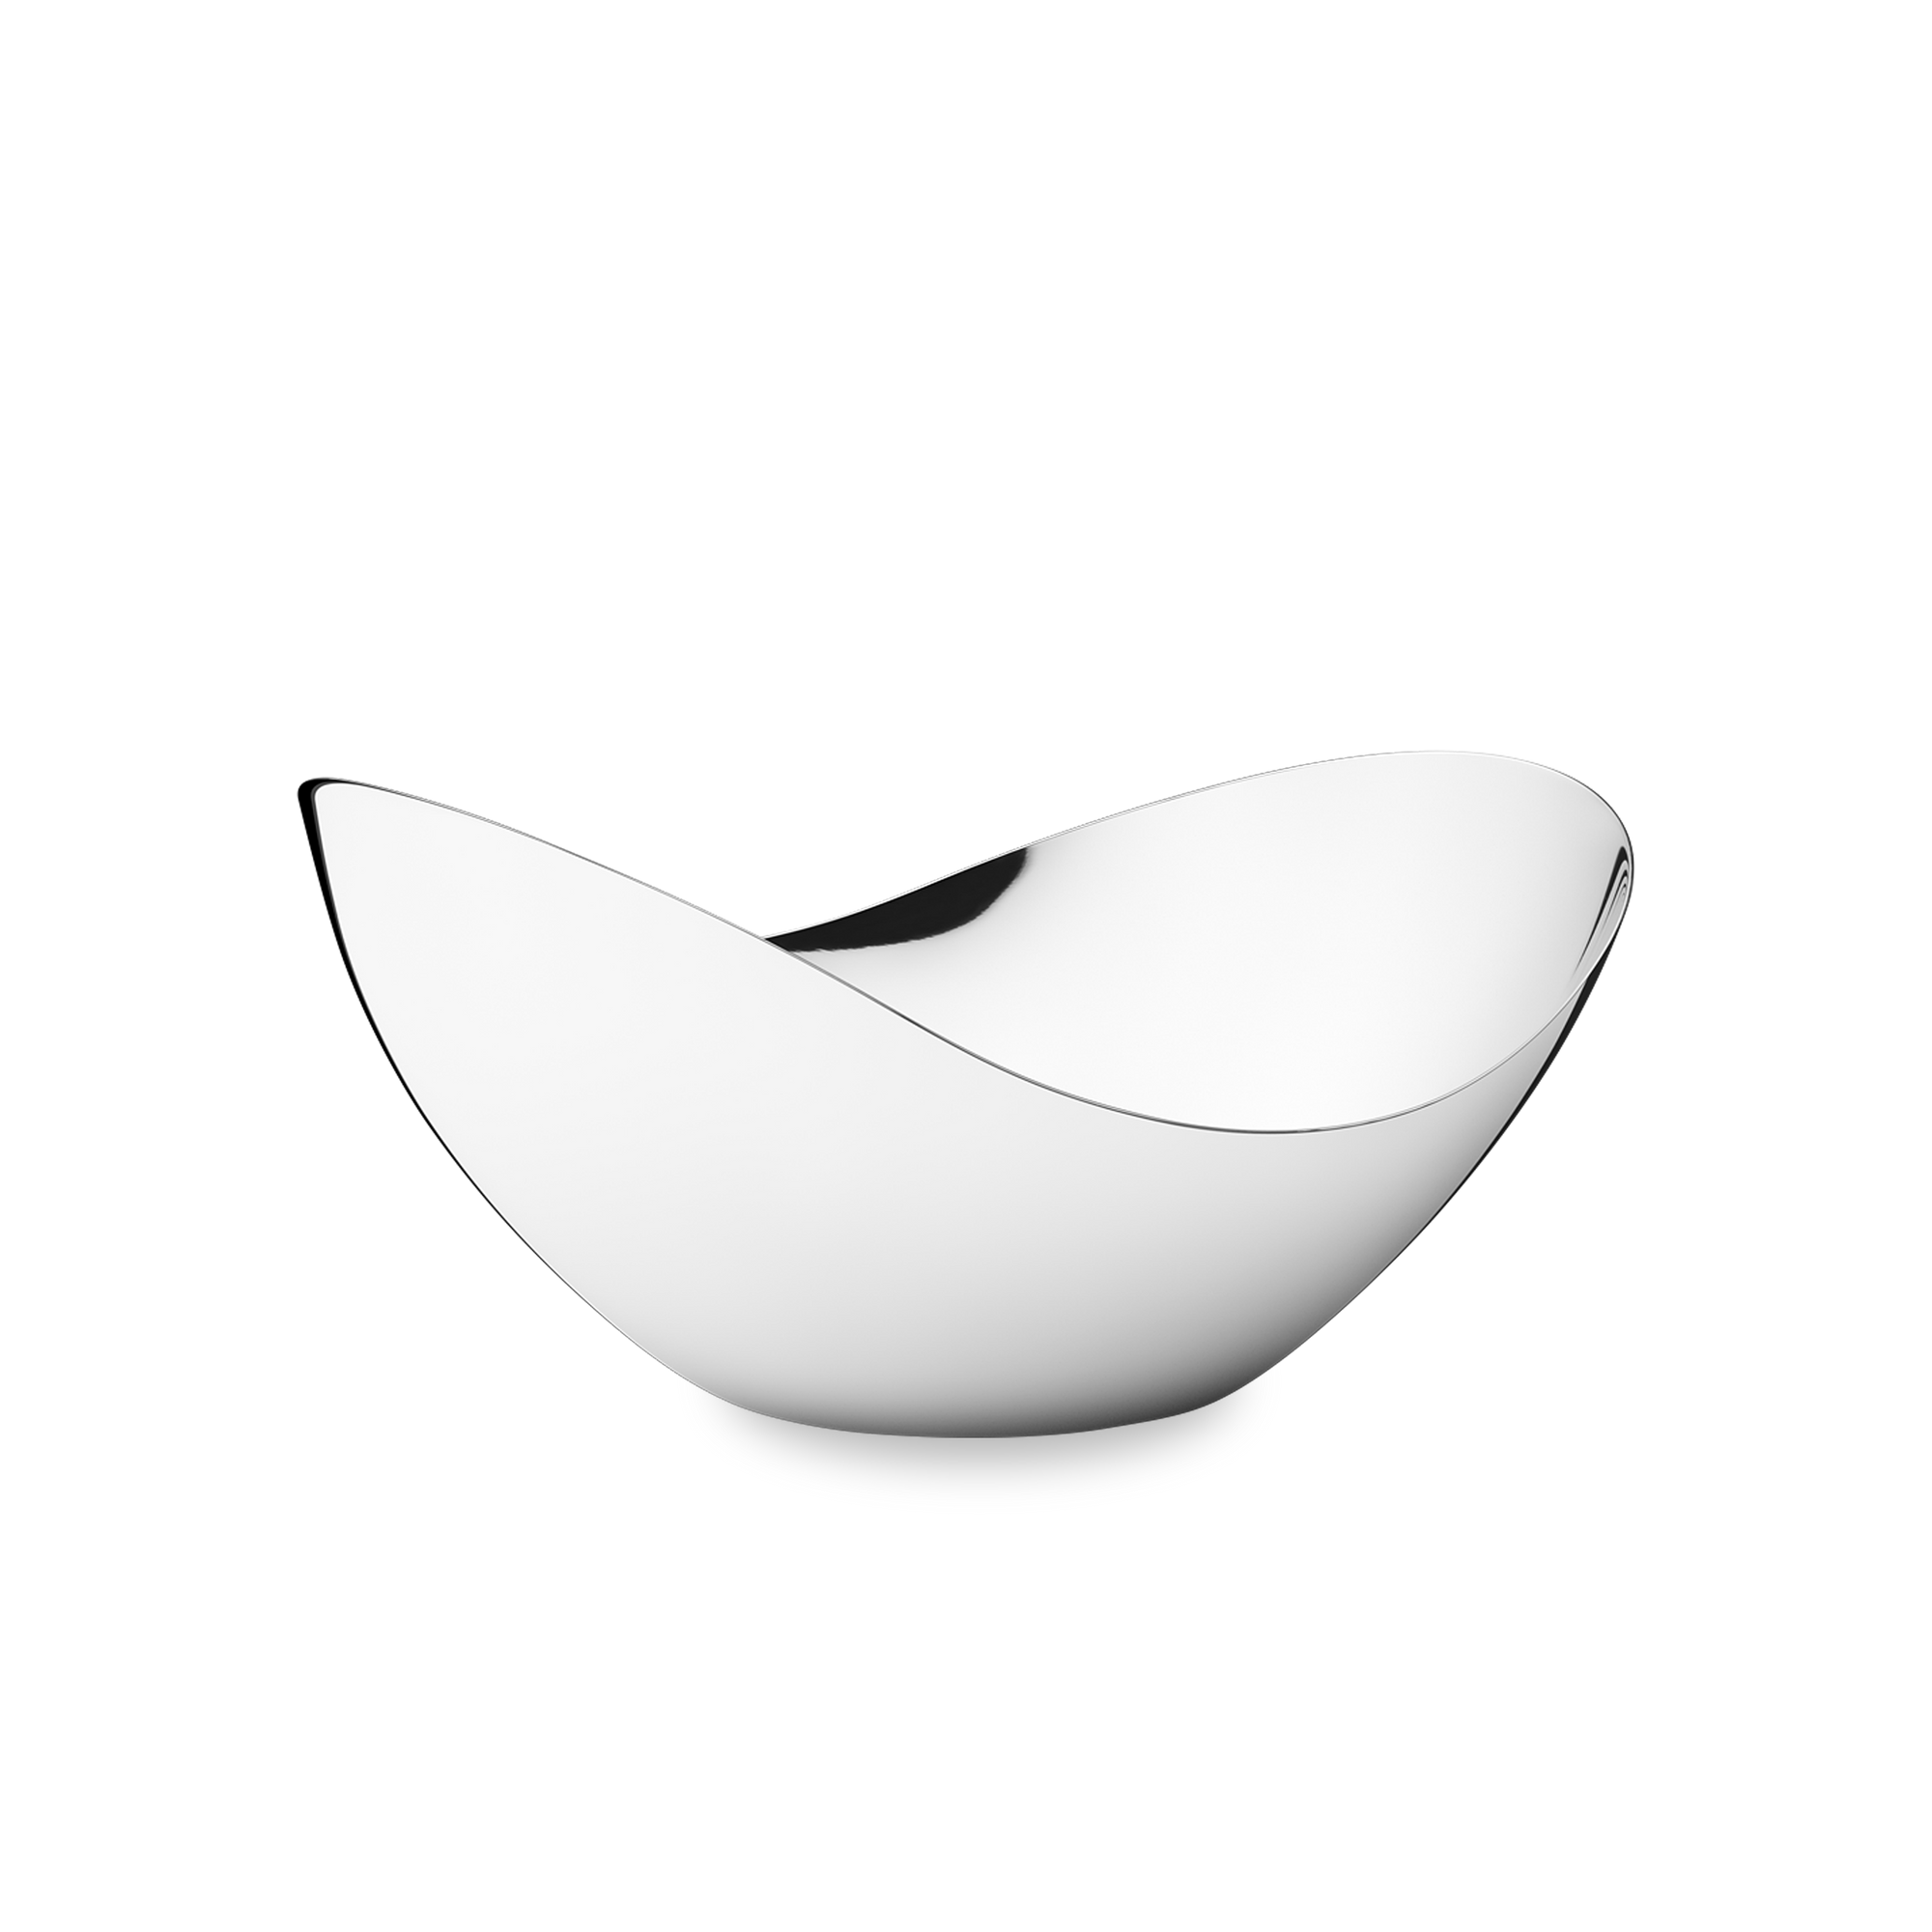 The Bloom Bowl's shape is inspired by the gently curved petals of cherry blossom.